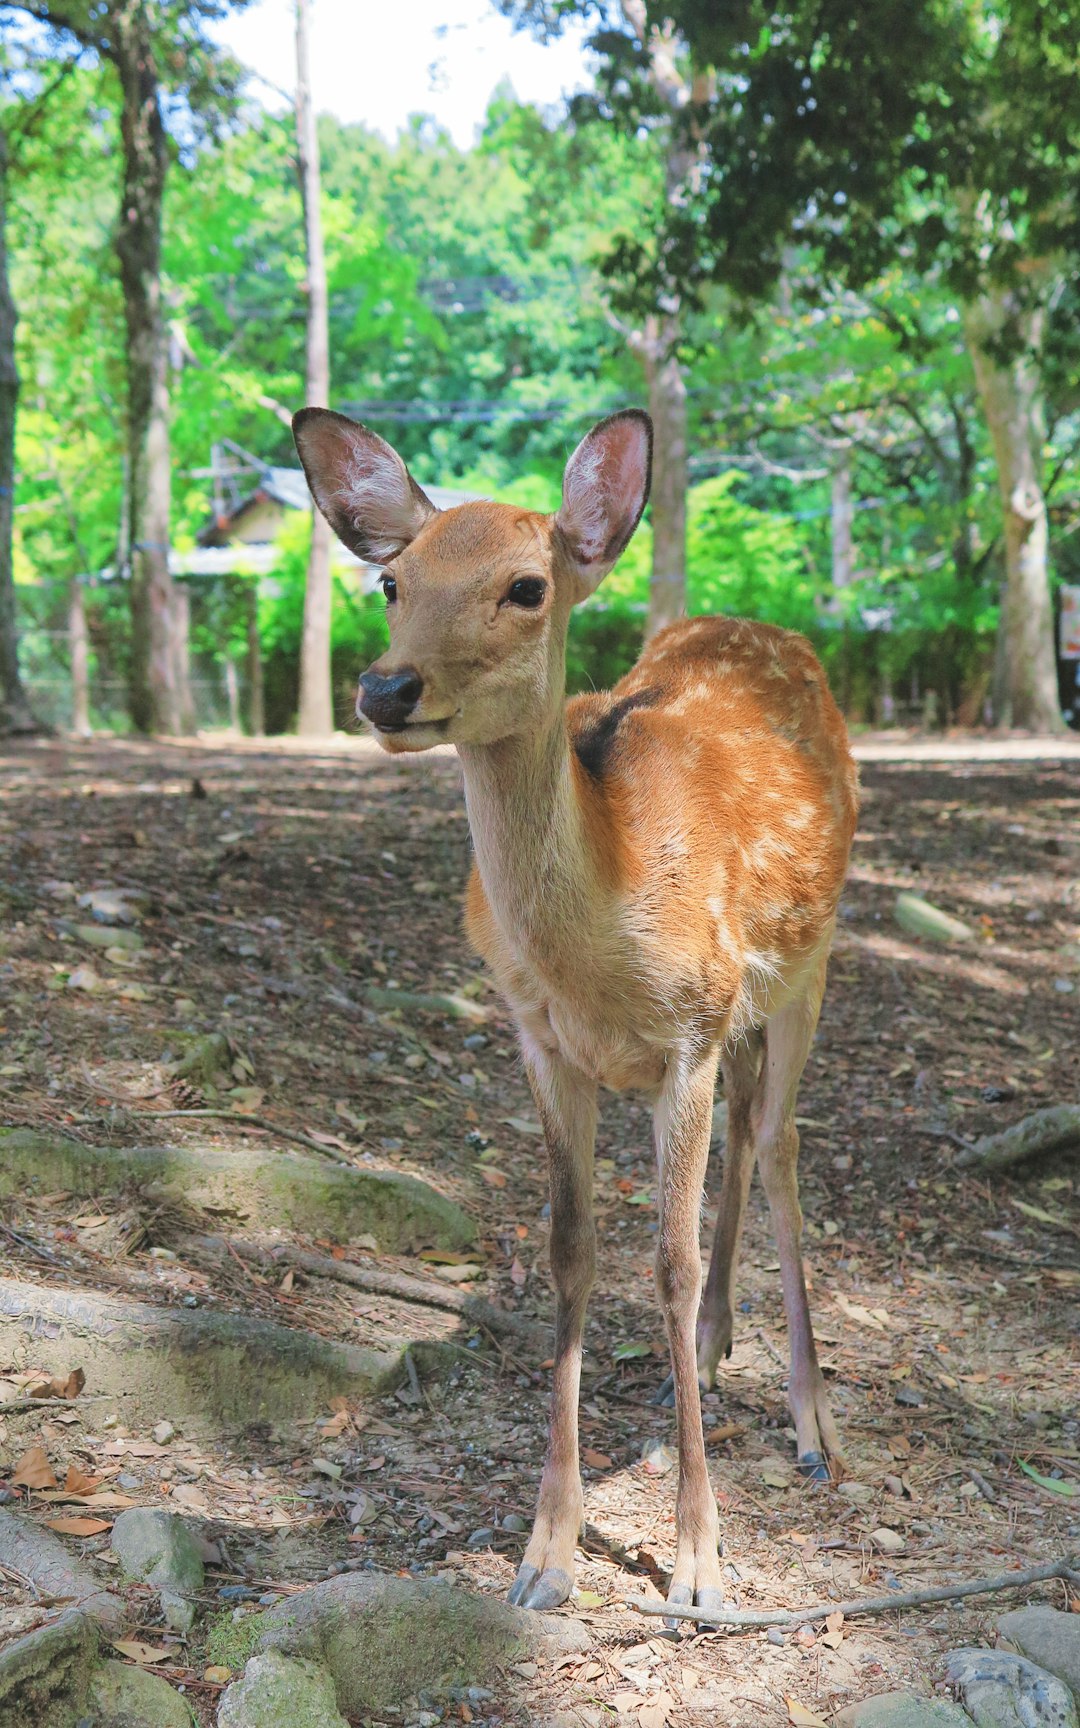 Travel Tips and Stories of Nara Park in Japan